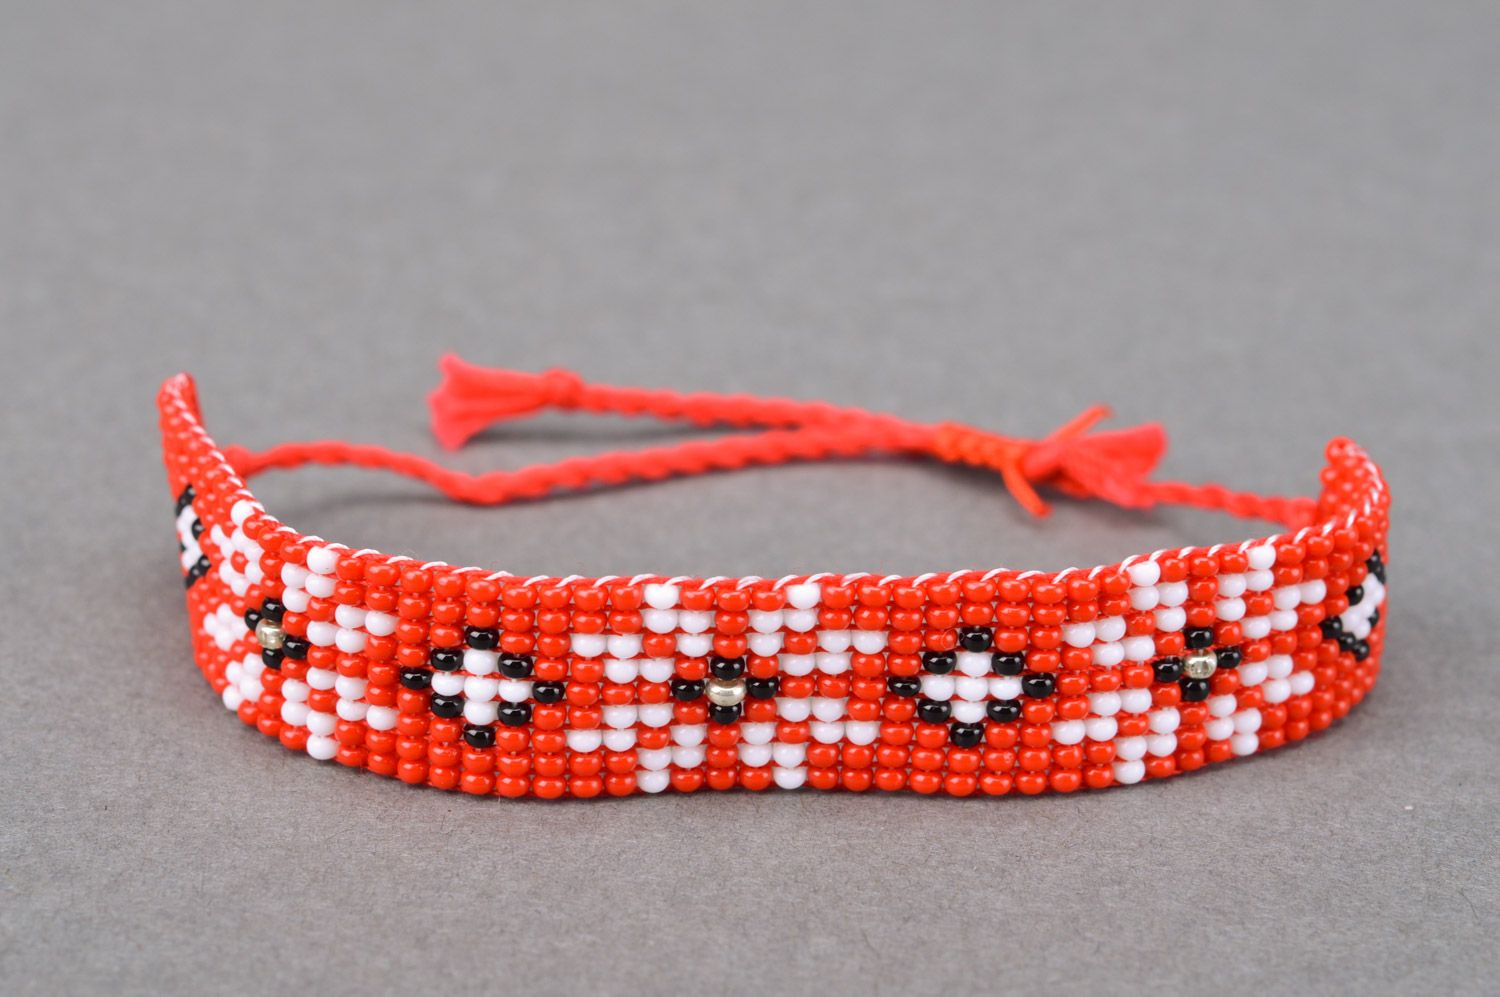 Handmade red beaded wrist bracelet with ties and white flower pattern photo 1